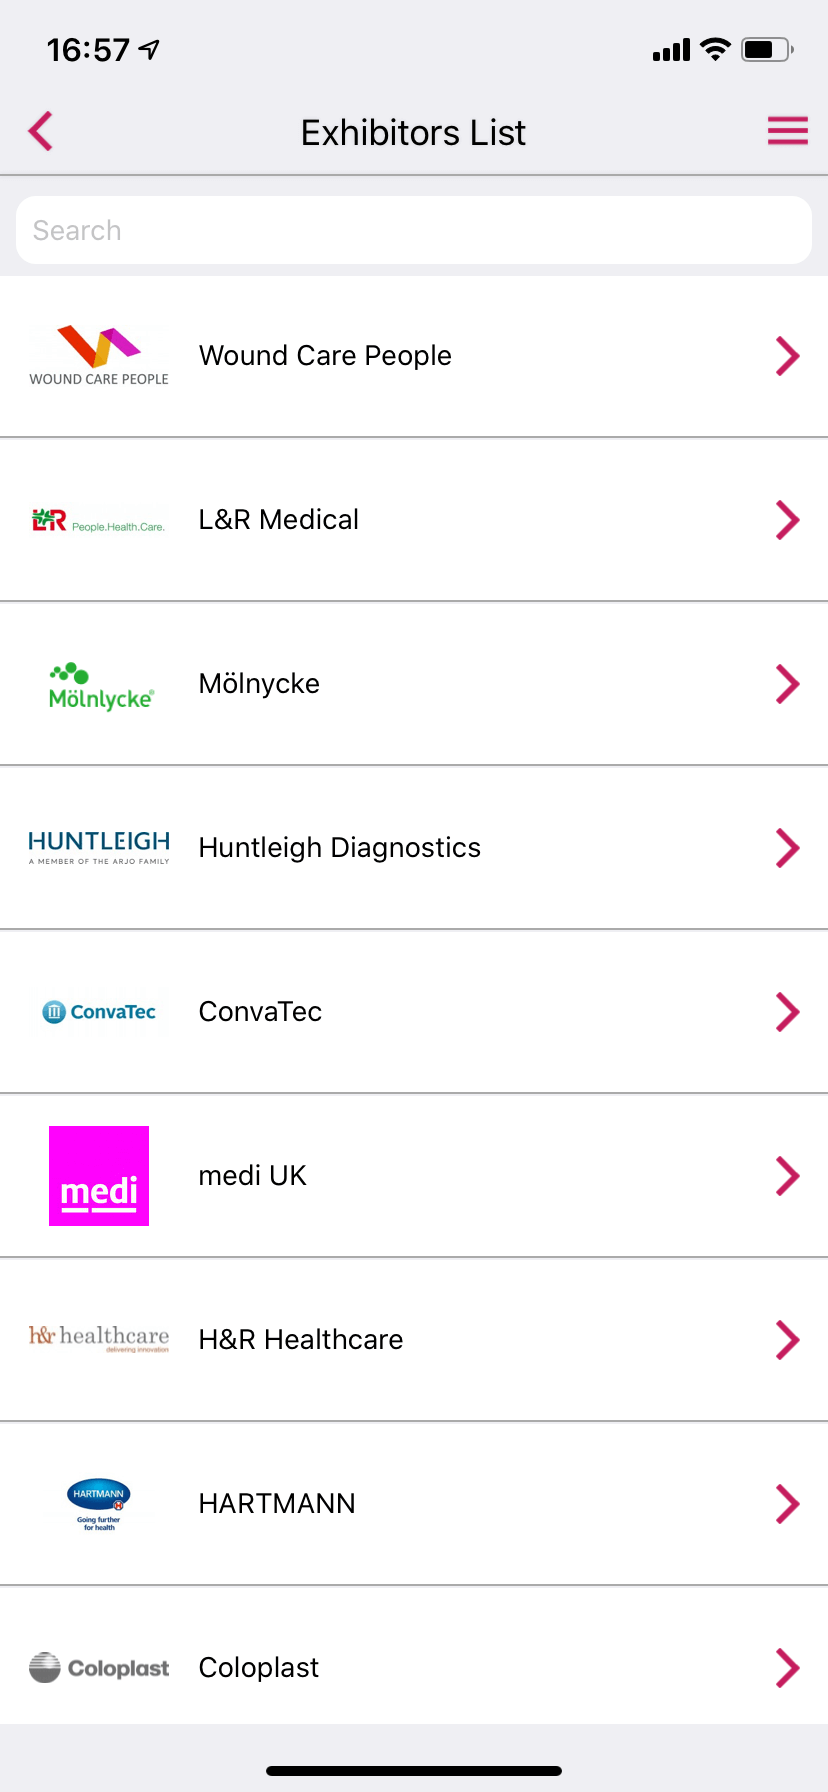 Exhibitors list of an event app by VenuIQ